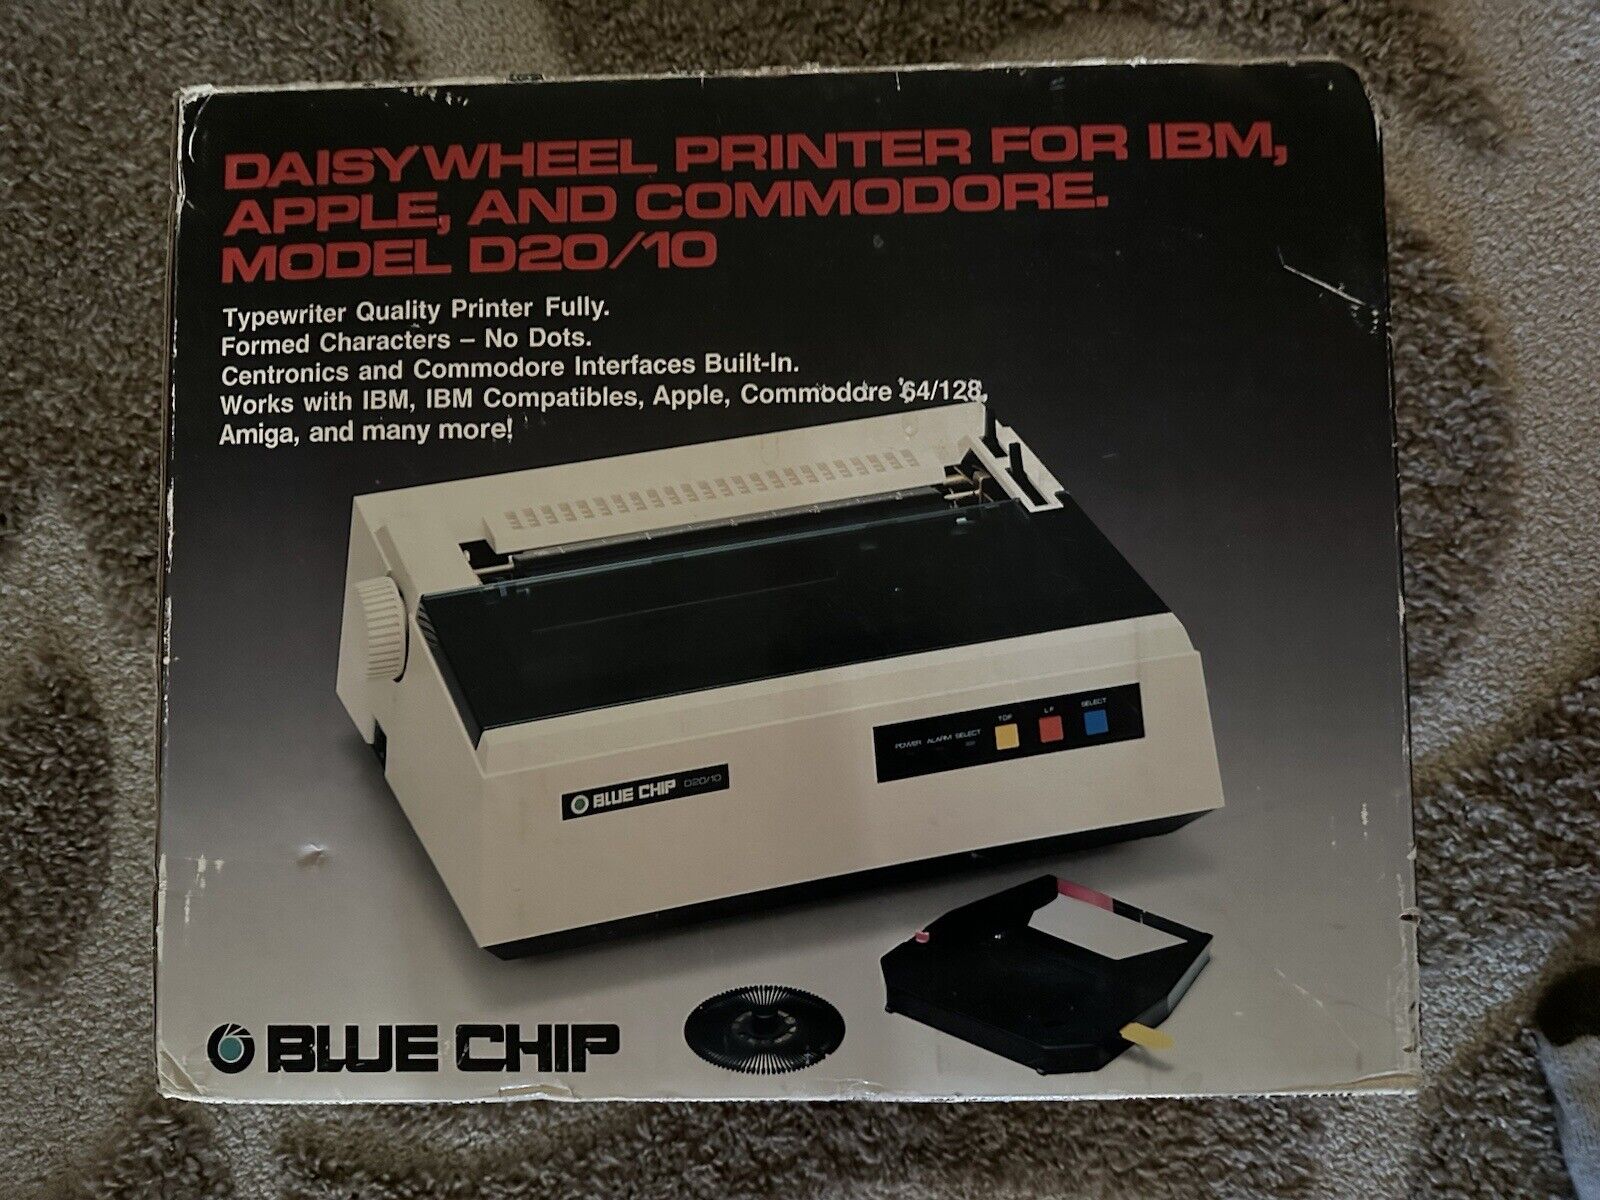 RARE VINTAGE BLUE CHIP D20/10 DAISY WHEEL PRINTER For IBM, APPLE, And COMMODORE